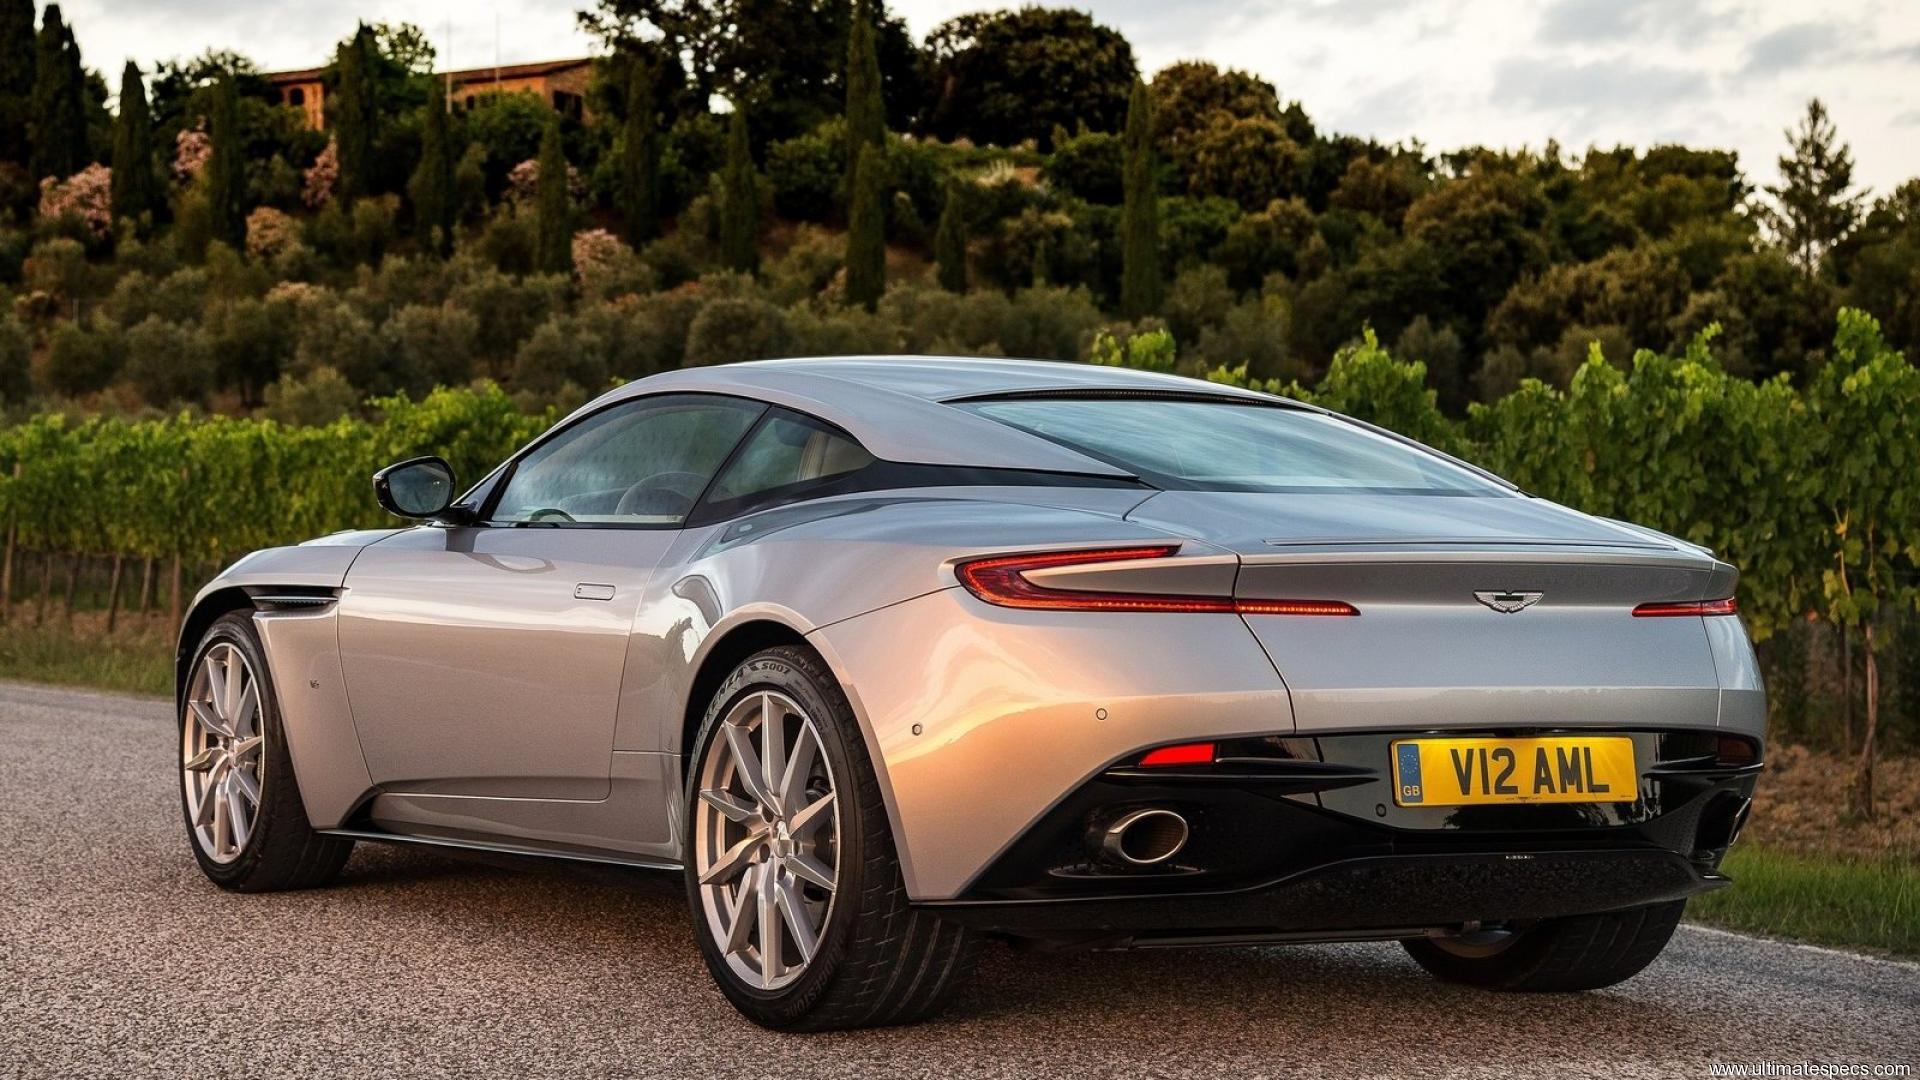 Aston Martin DB11 Images, pictures, gallery